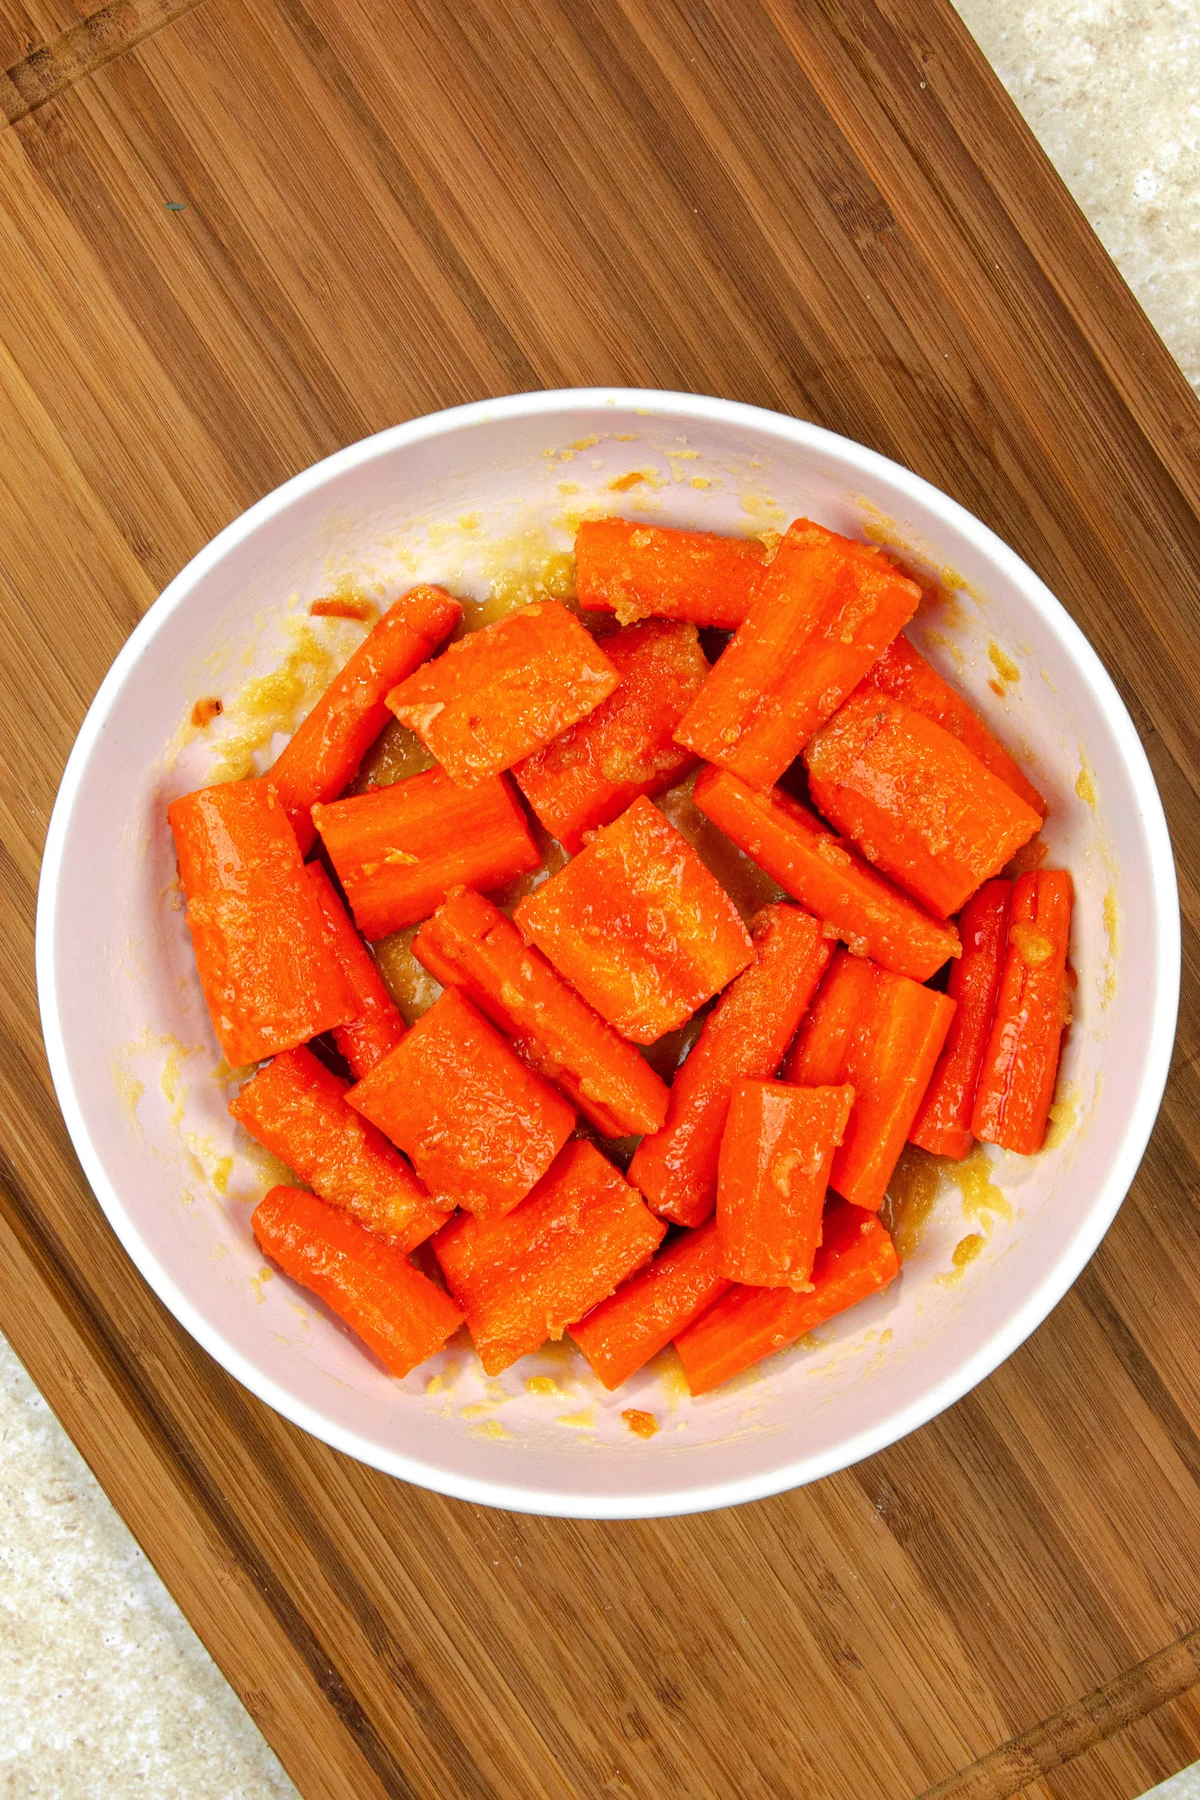 Bowl of sliced carrots with honey brown sugar glaze mixed in.